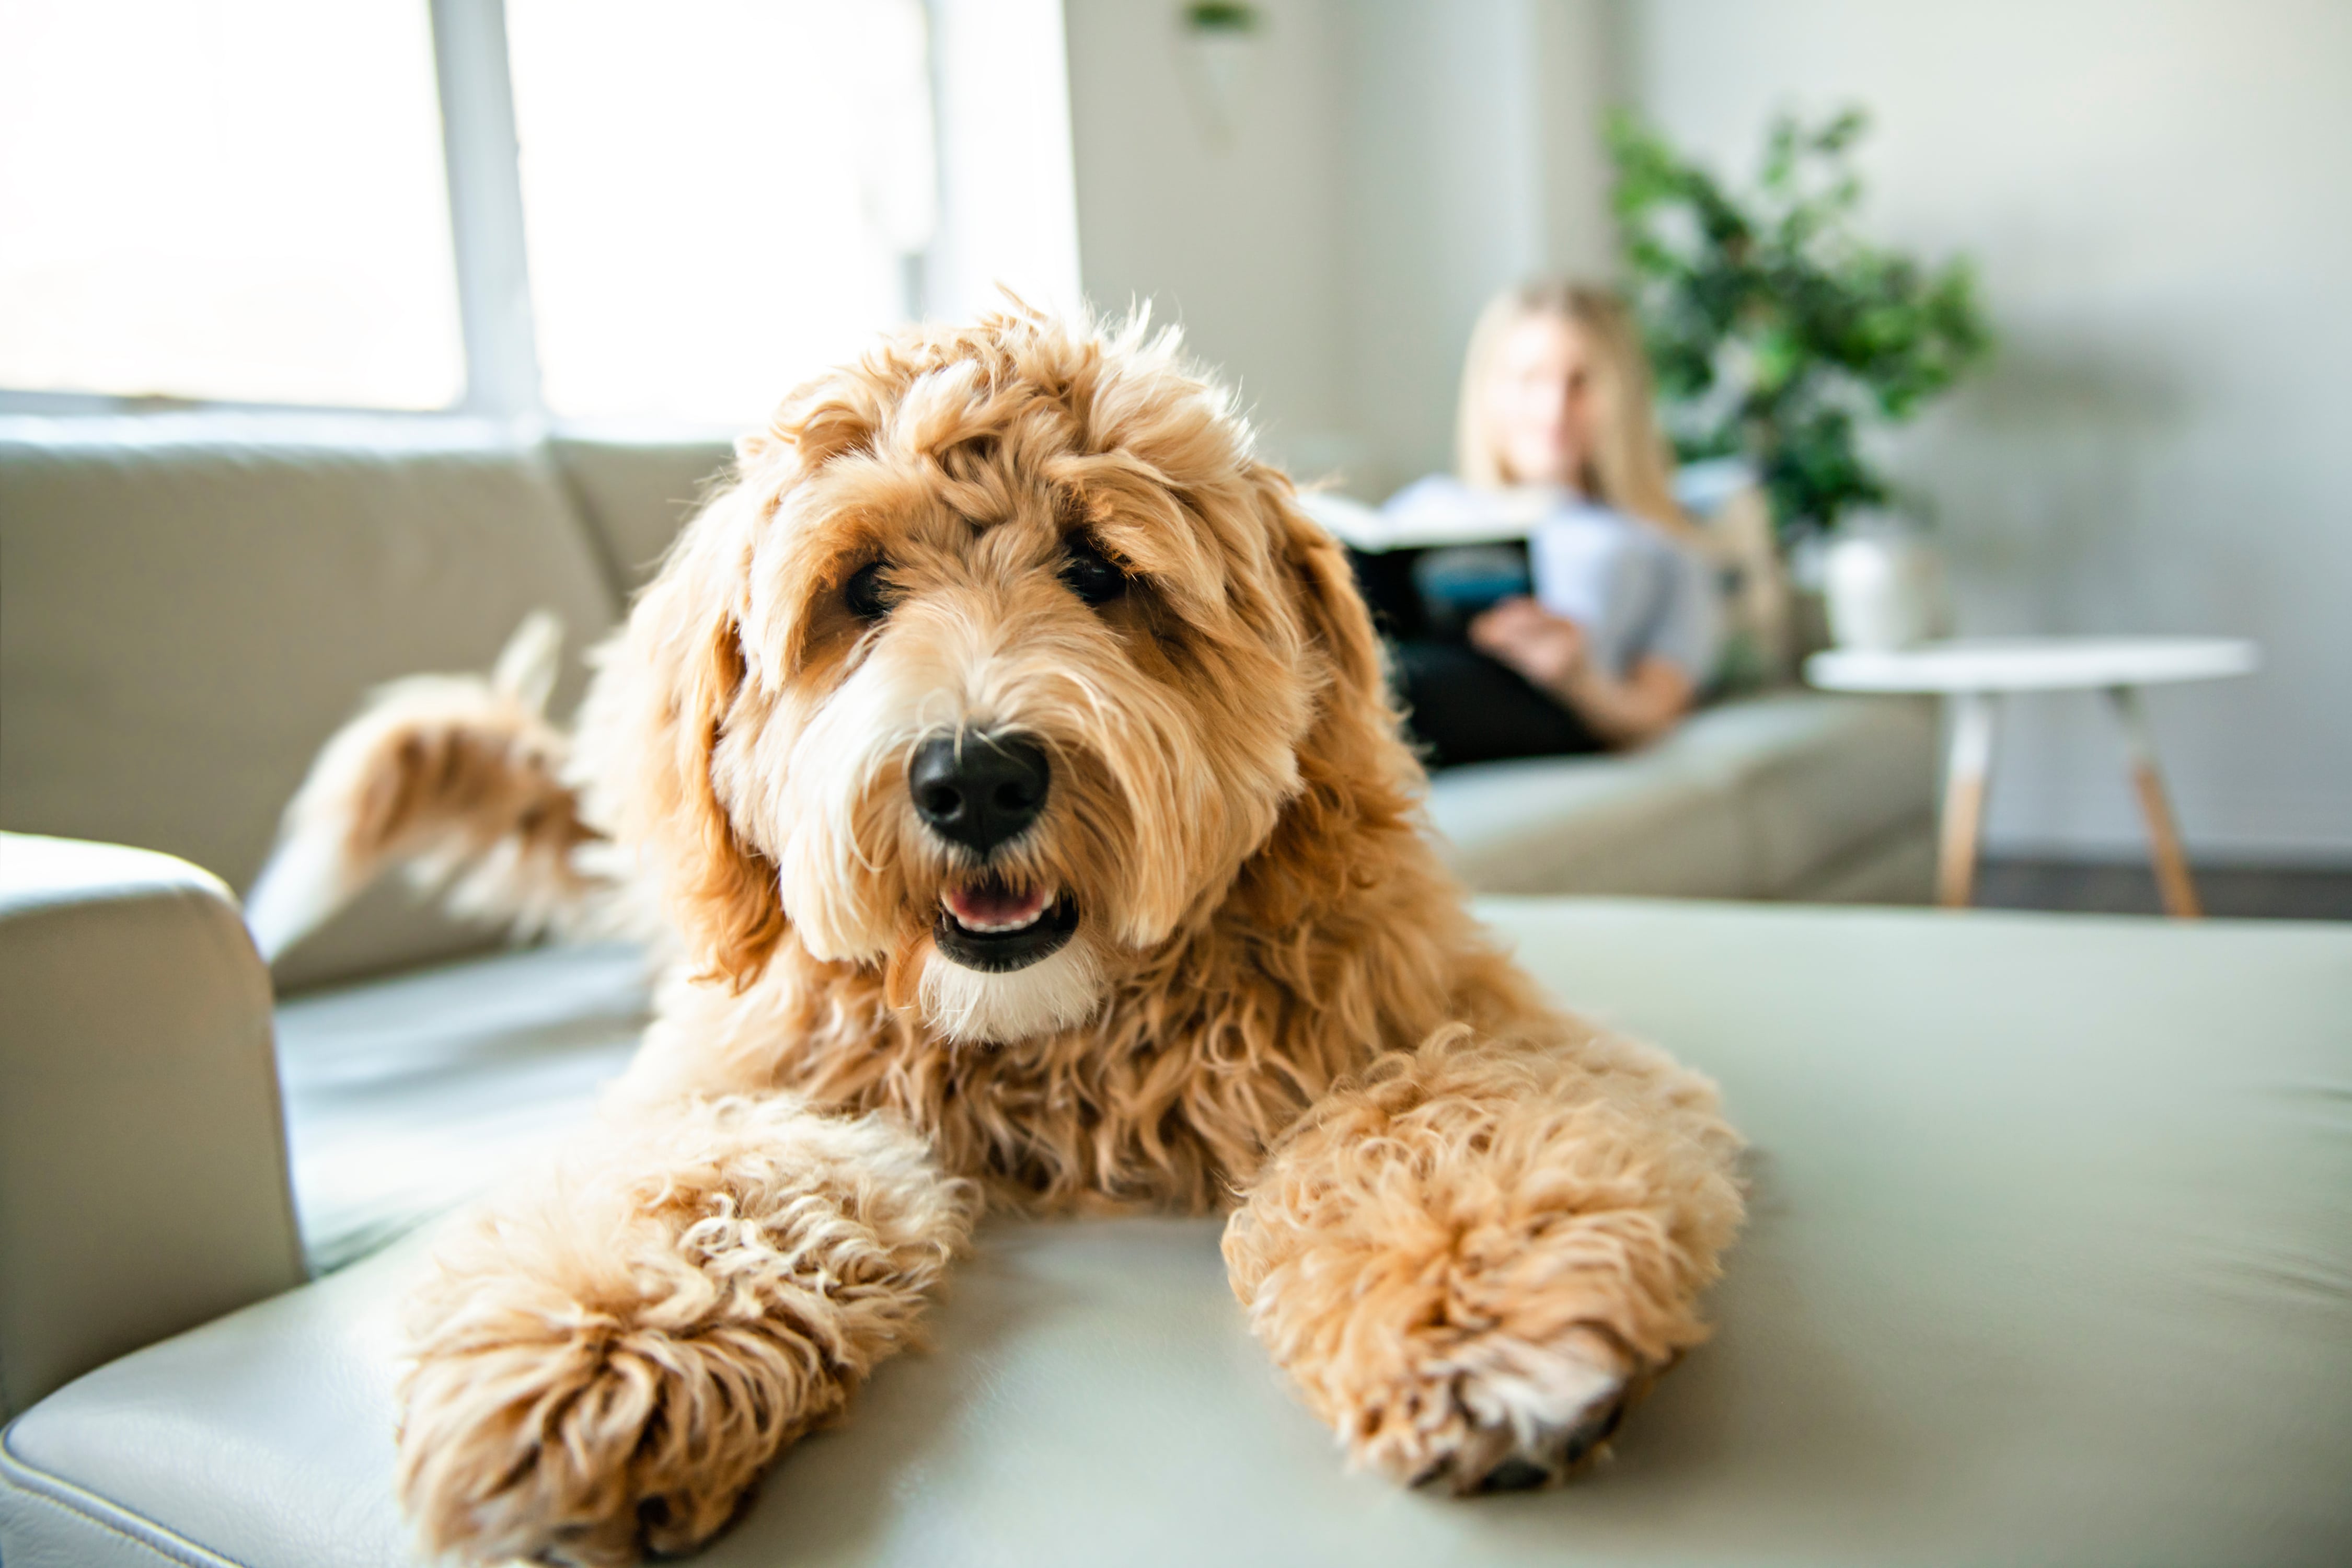 A dog looking into the camera lens while lying in the couch, in the background its owner is also lounging on the couch reading a book